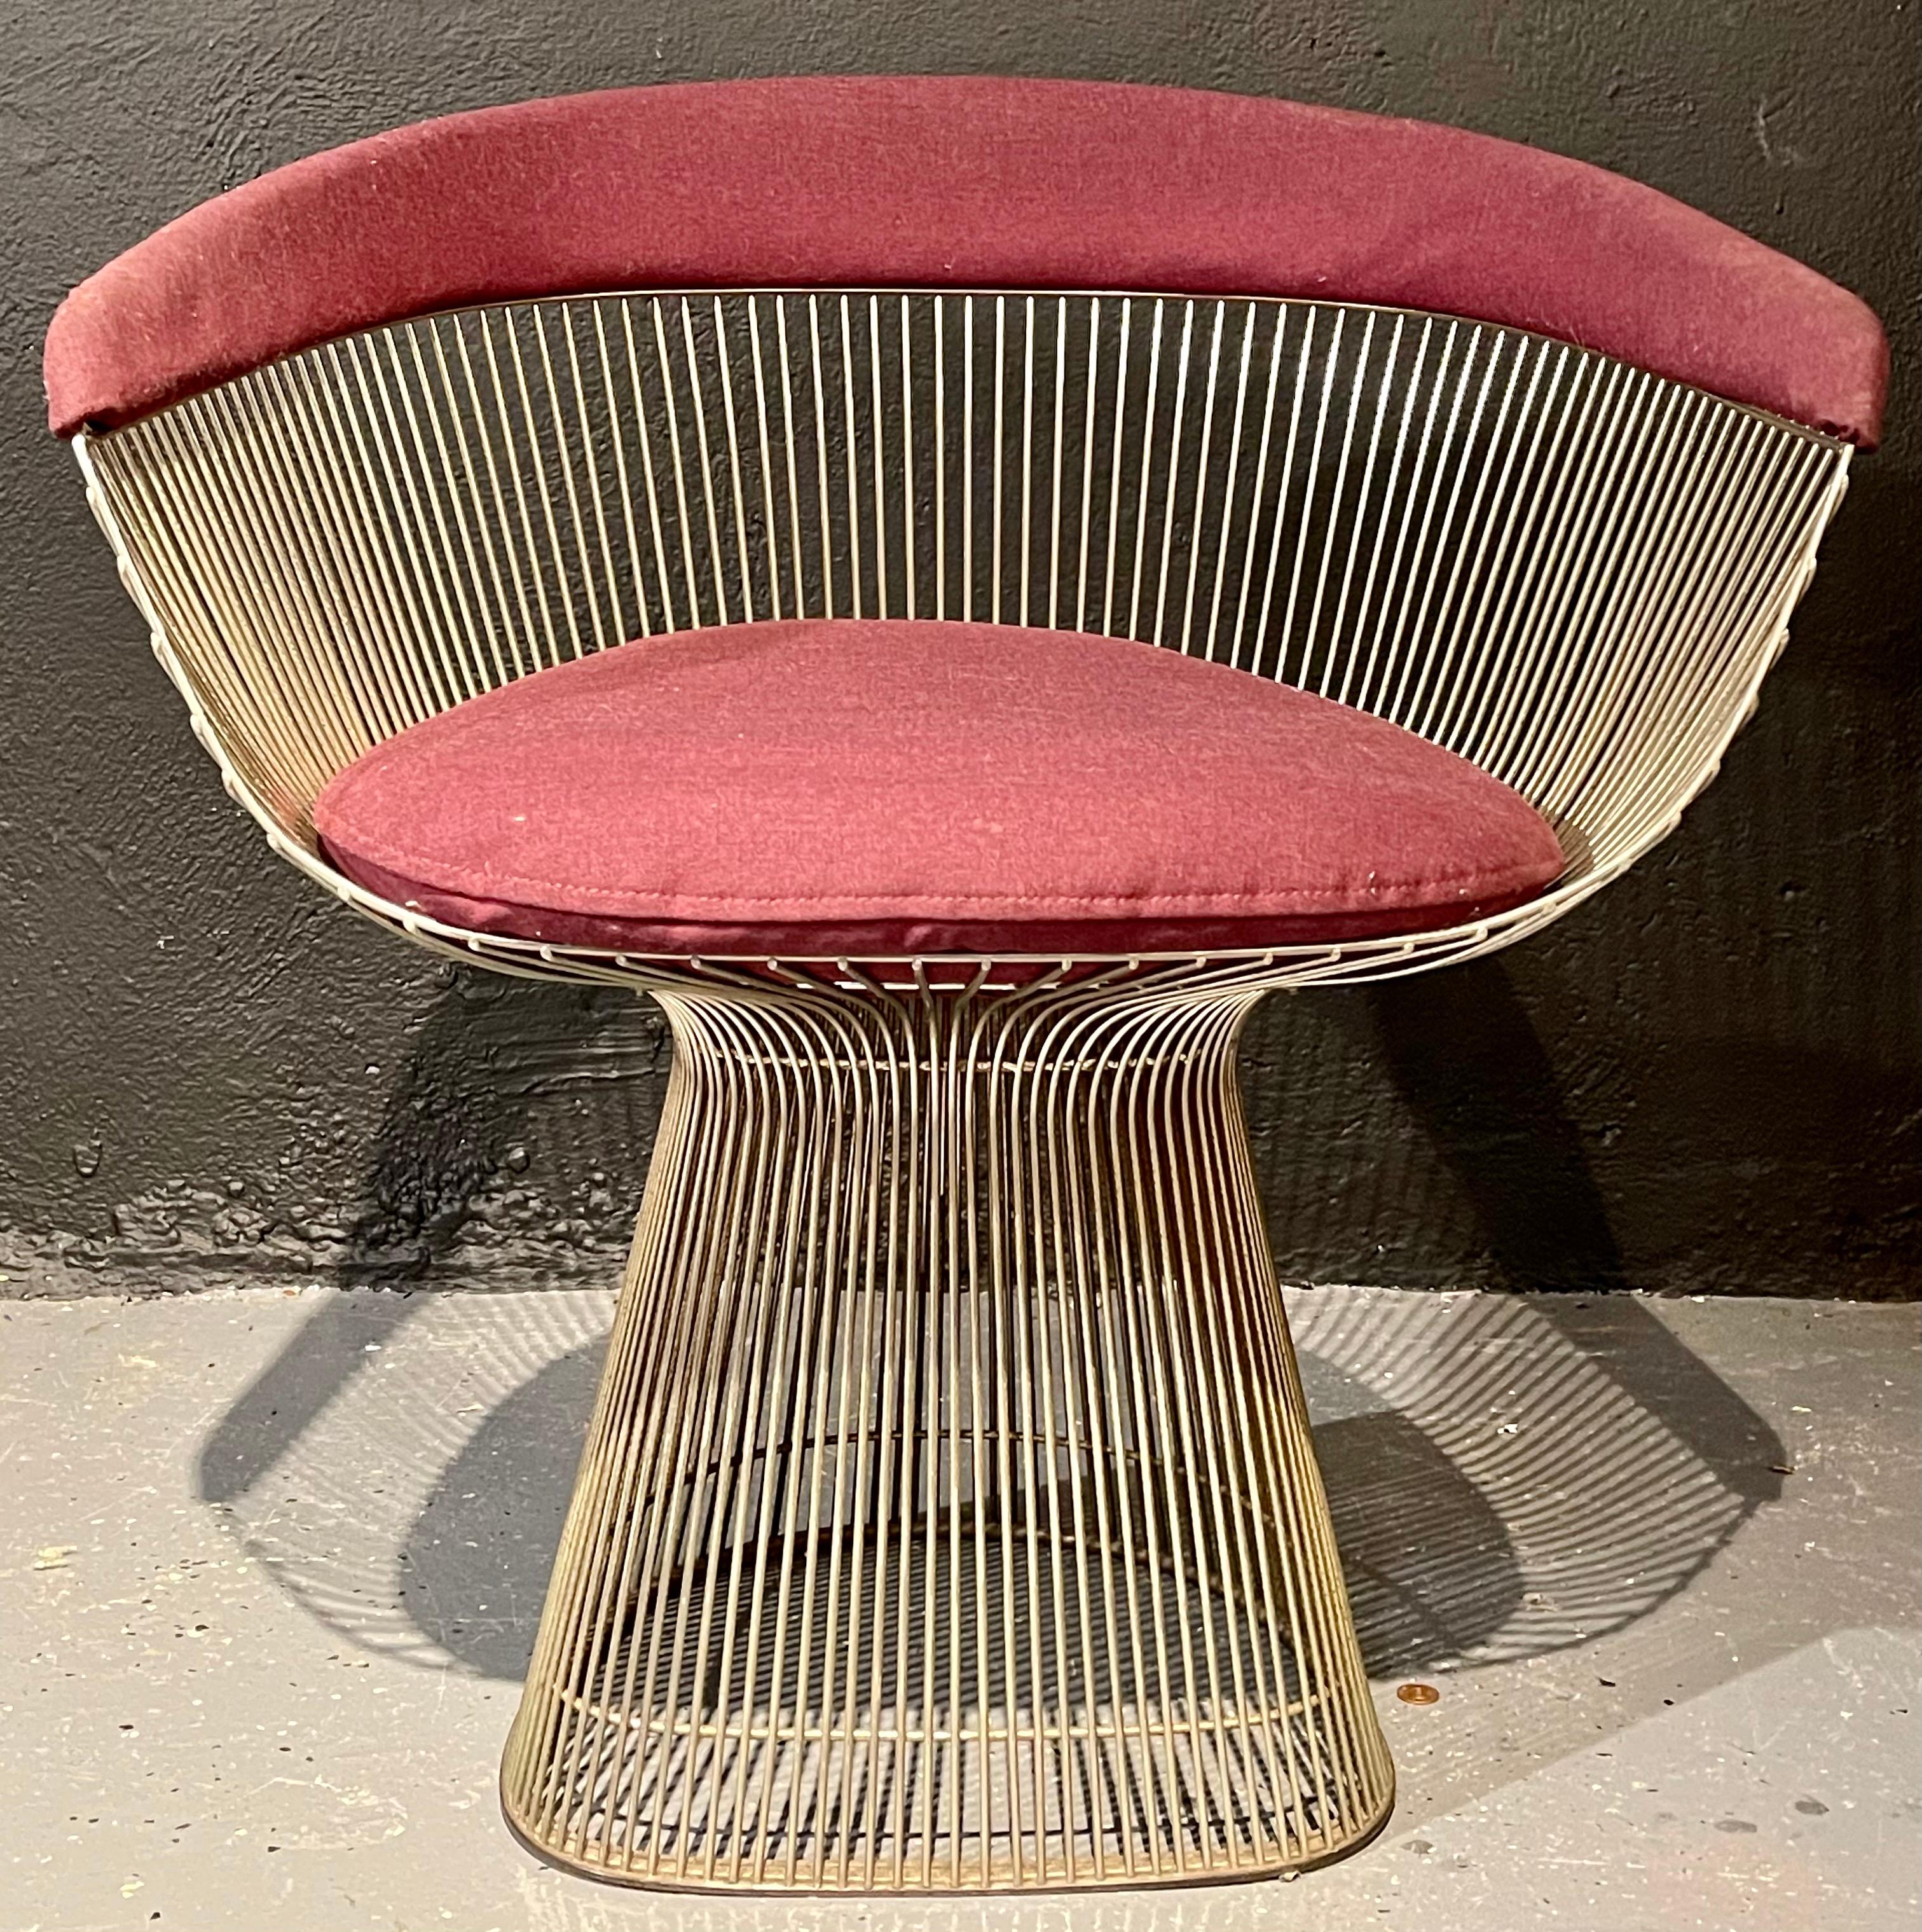 Platner is a seats collection designed by Warren Platner for Knoll. Structure built with metal rods shaped in vertical and horizontal subsequently treated with nickel finish and clear protective, shell with foam cushions variable density. Platner is